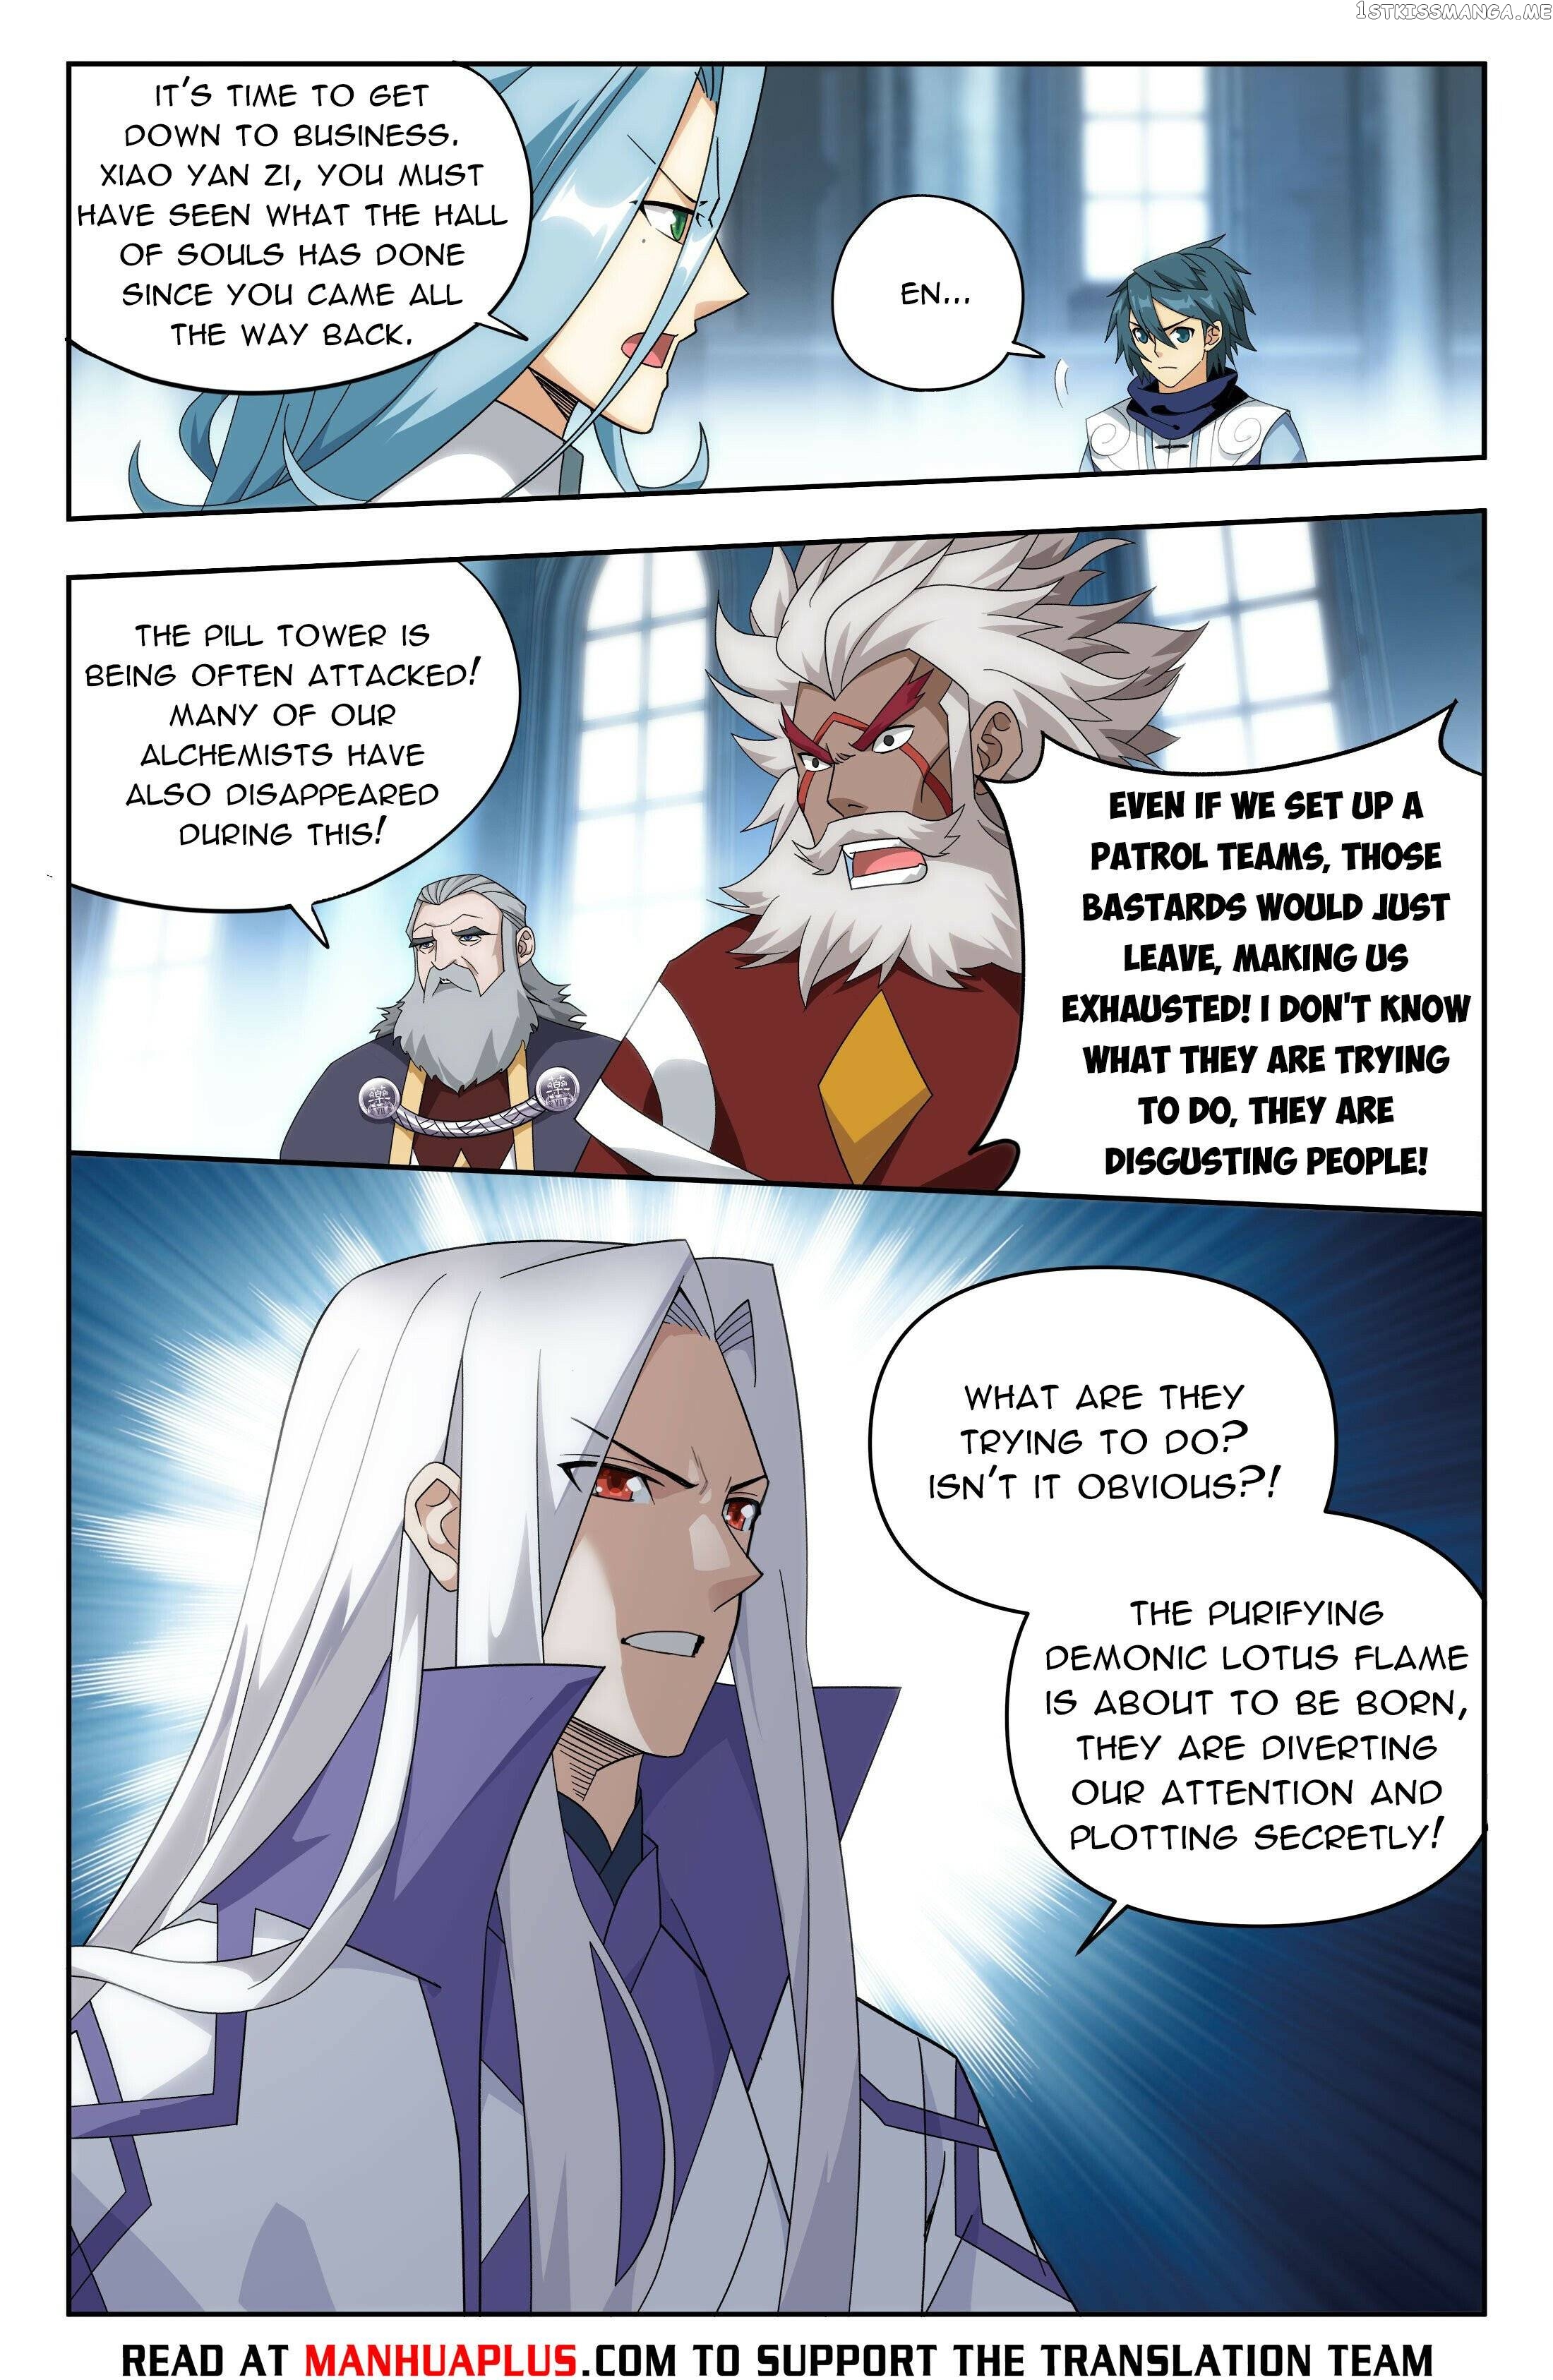 Battle Through the Heavens (a site with good translation?) : r/Manhua